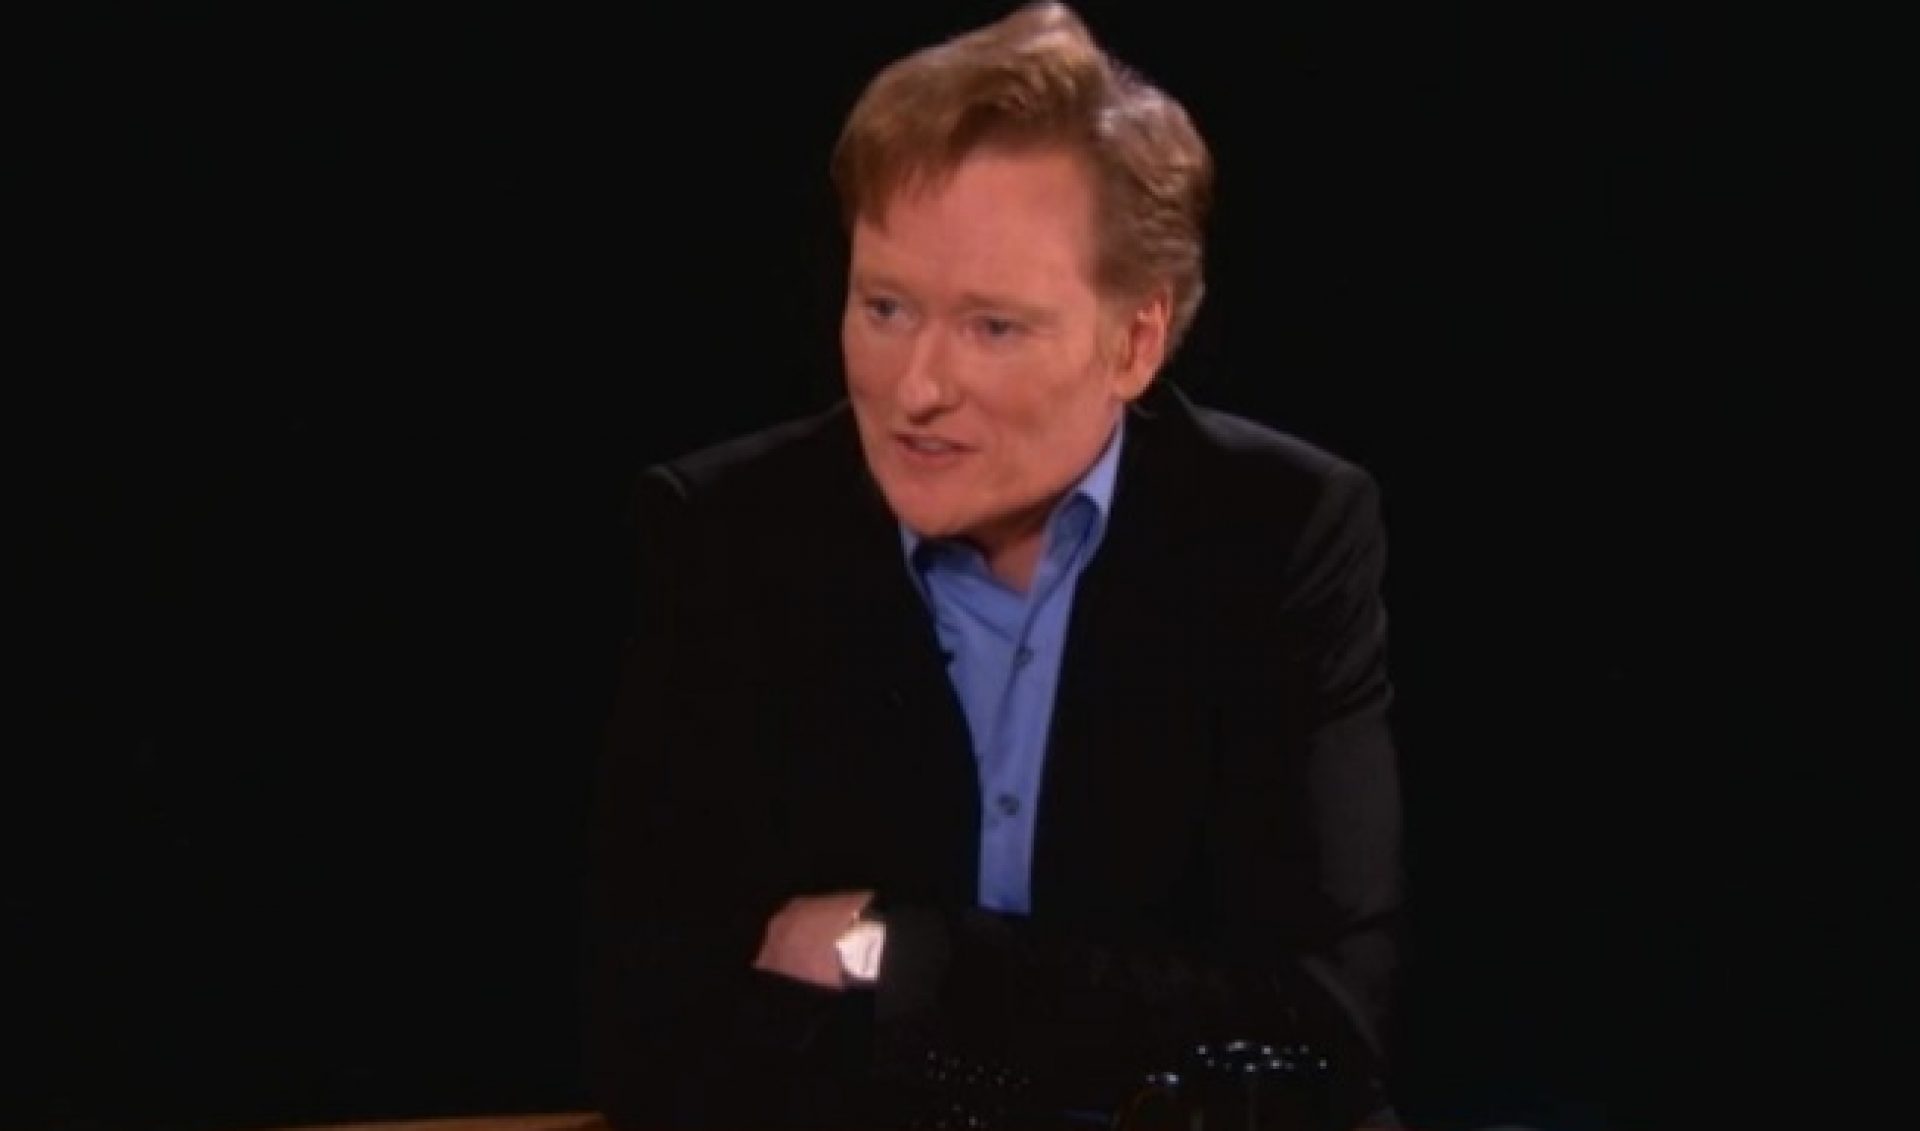 Conan O’Brien Gets His Charlie Rose on in Celebrity Interview Web Series